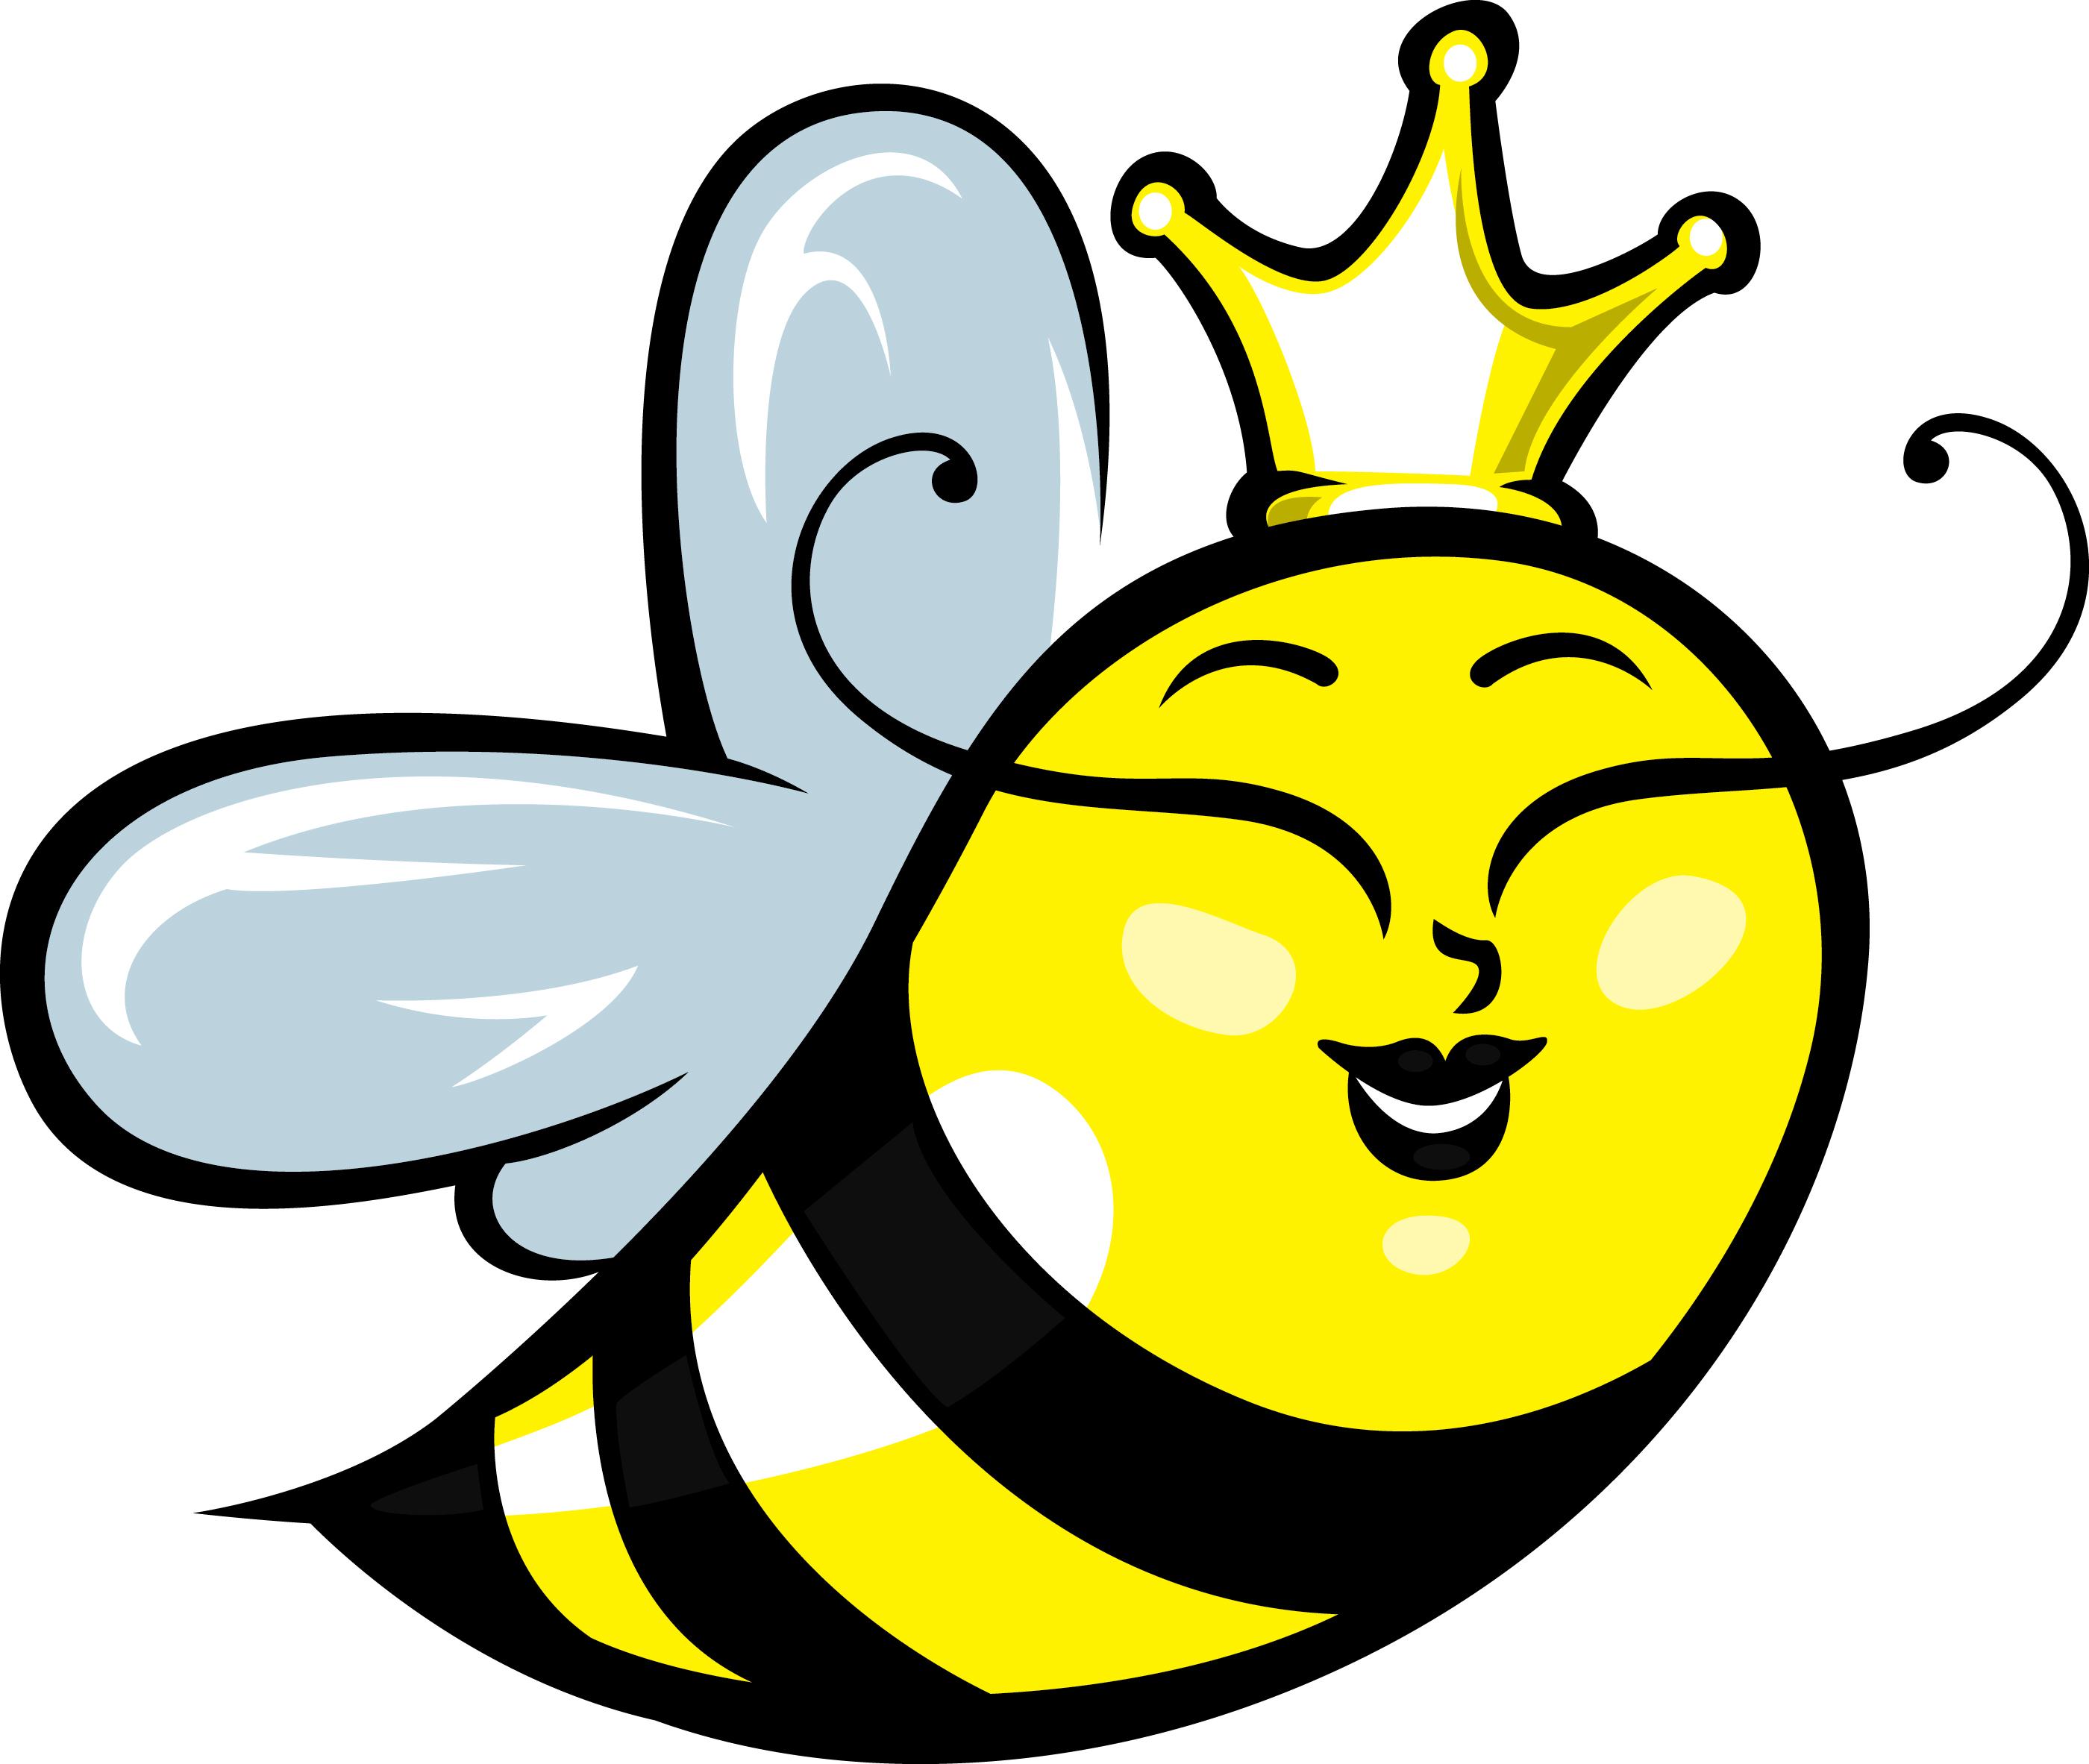 Free bee clip art drawings and colorful images - dbclipart.com